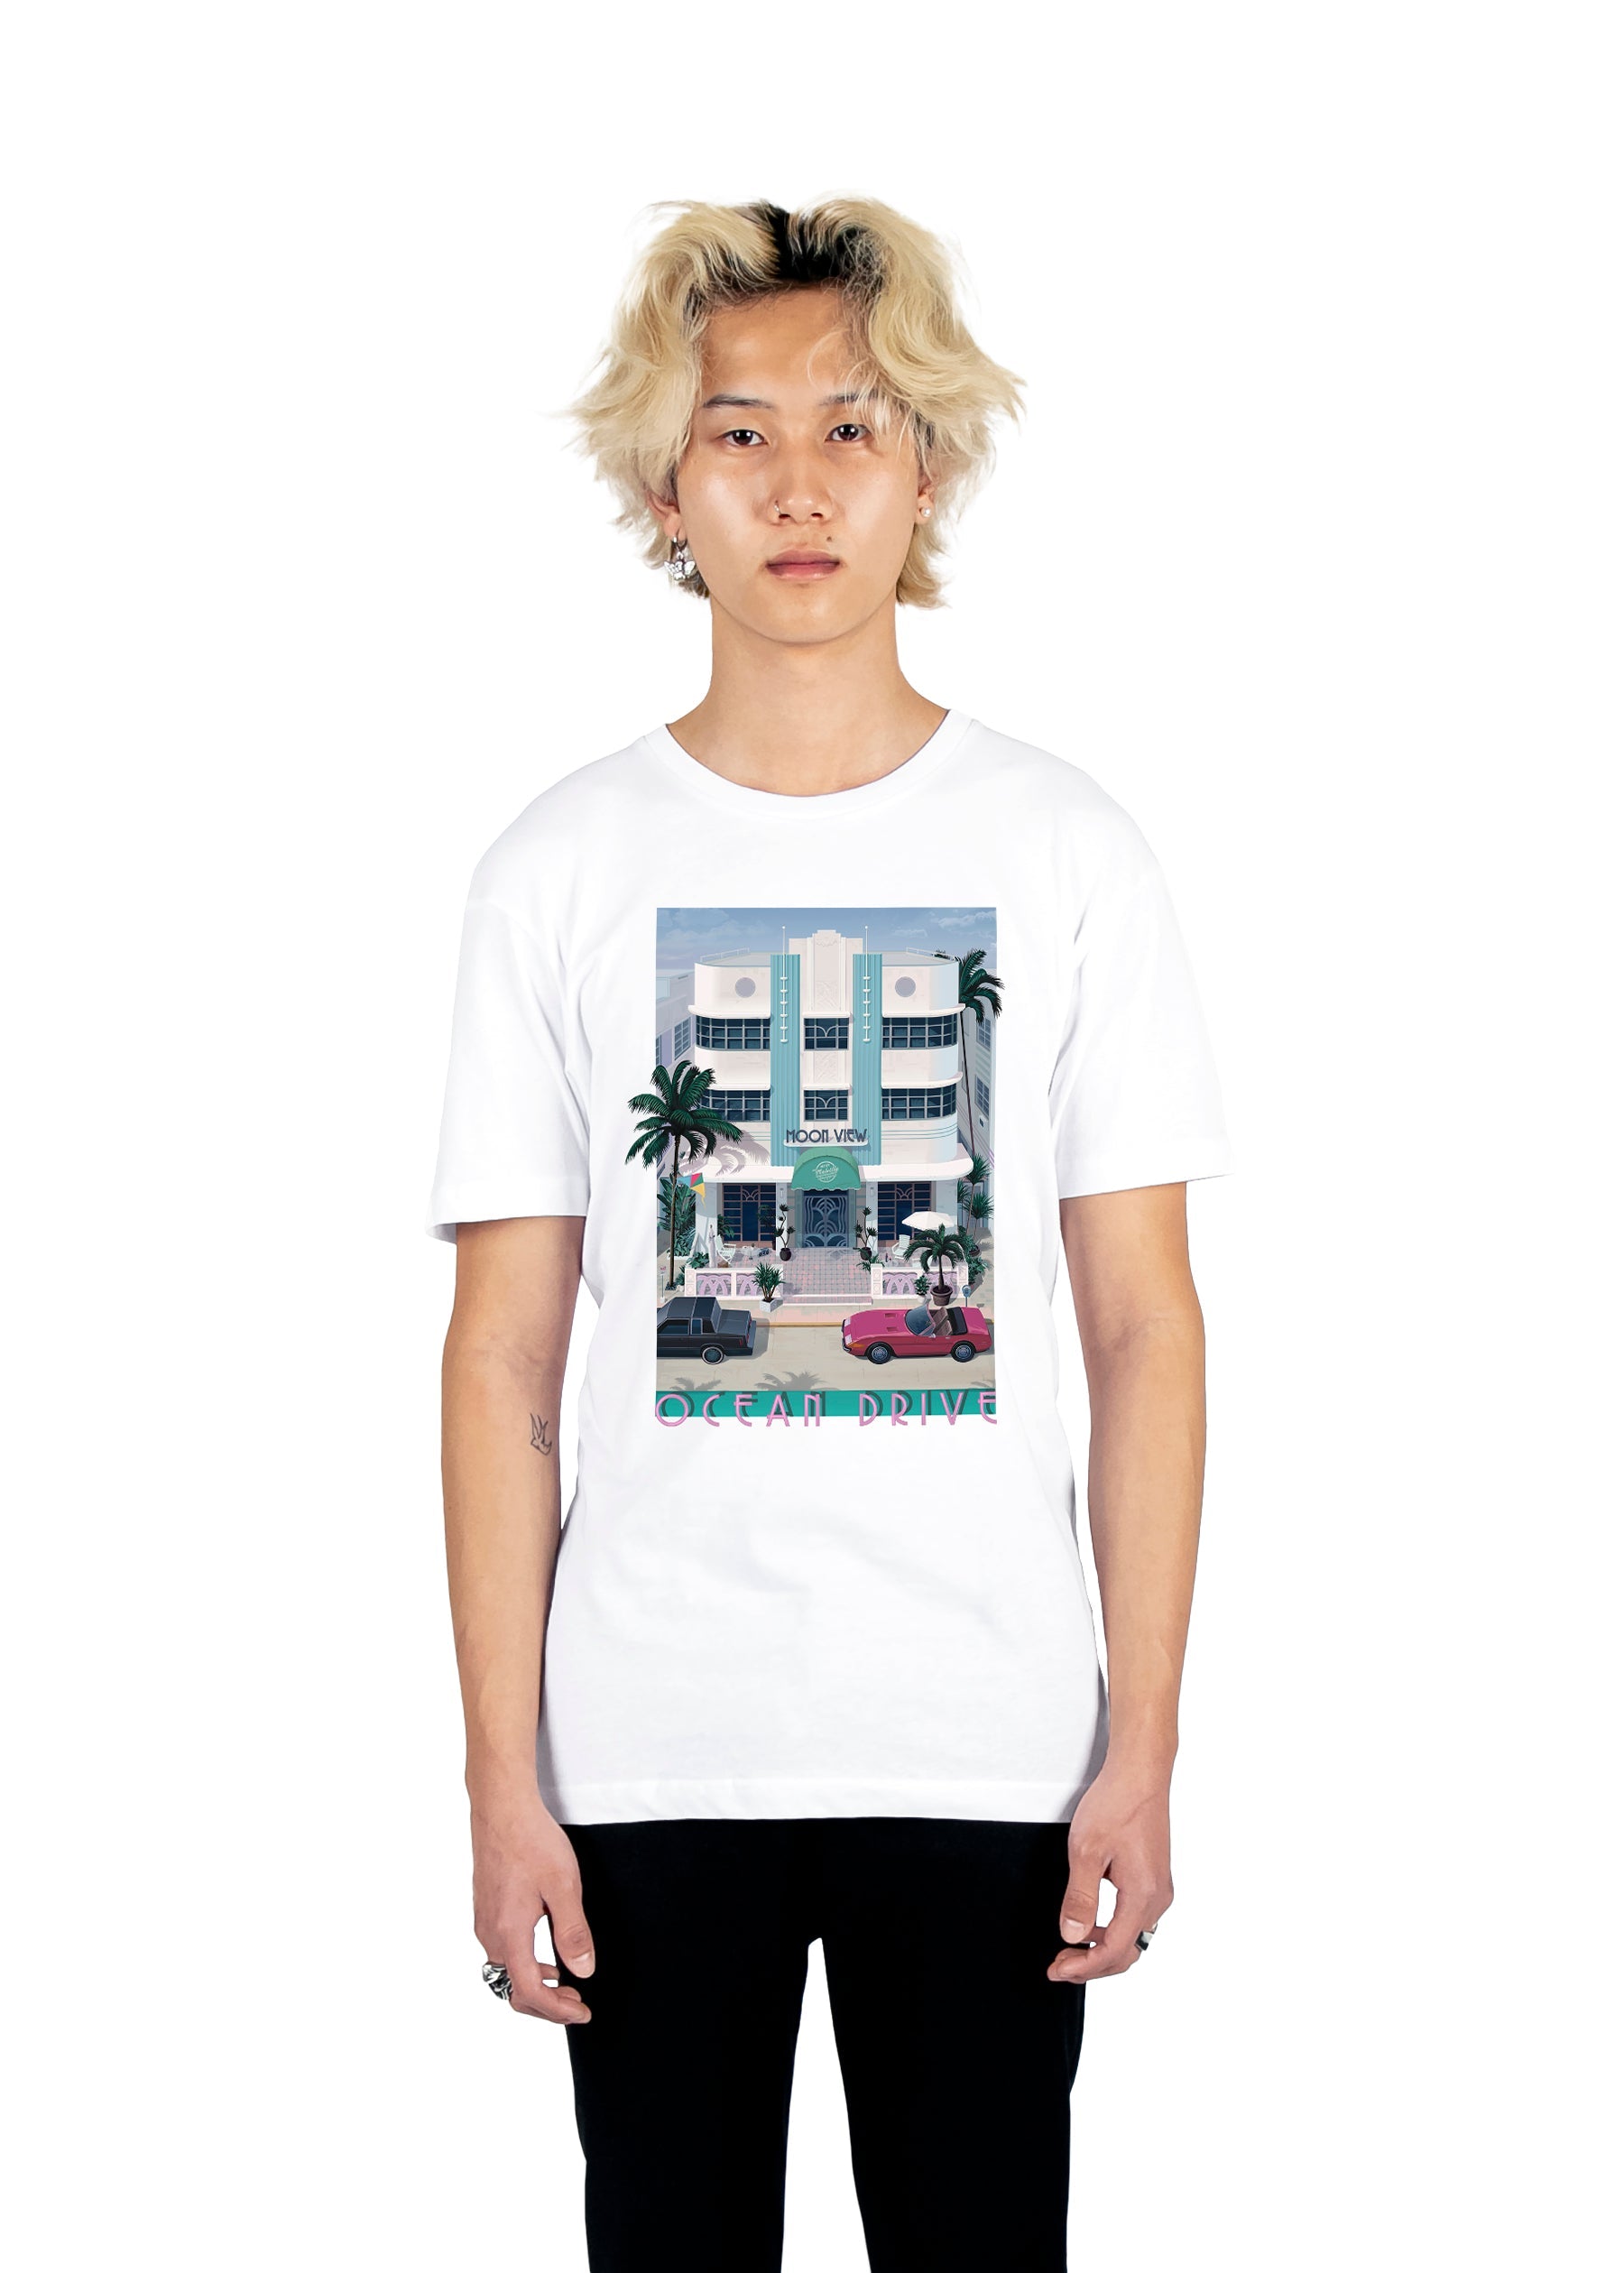 Deco Drive Tee Graphic Tee DTG White S 